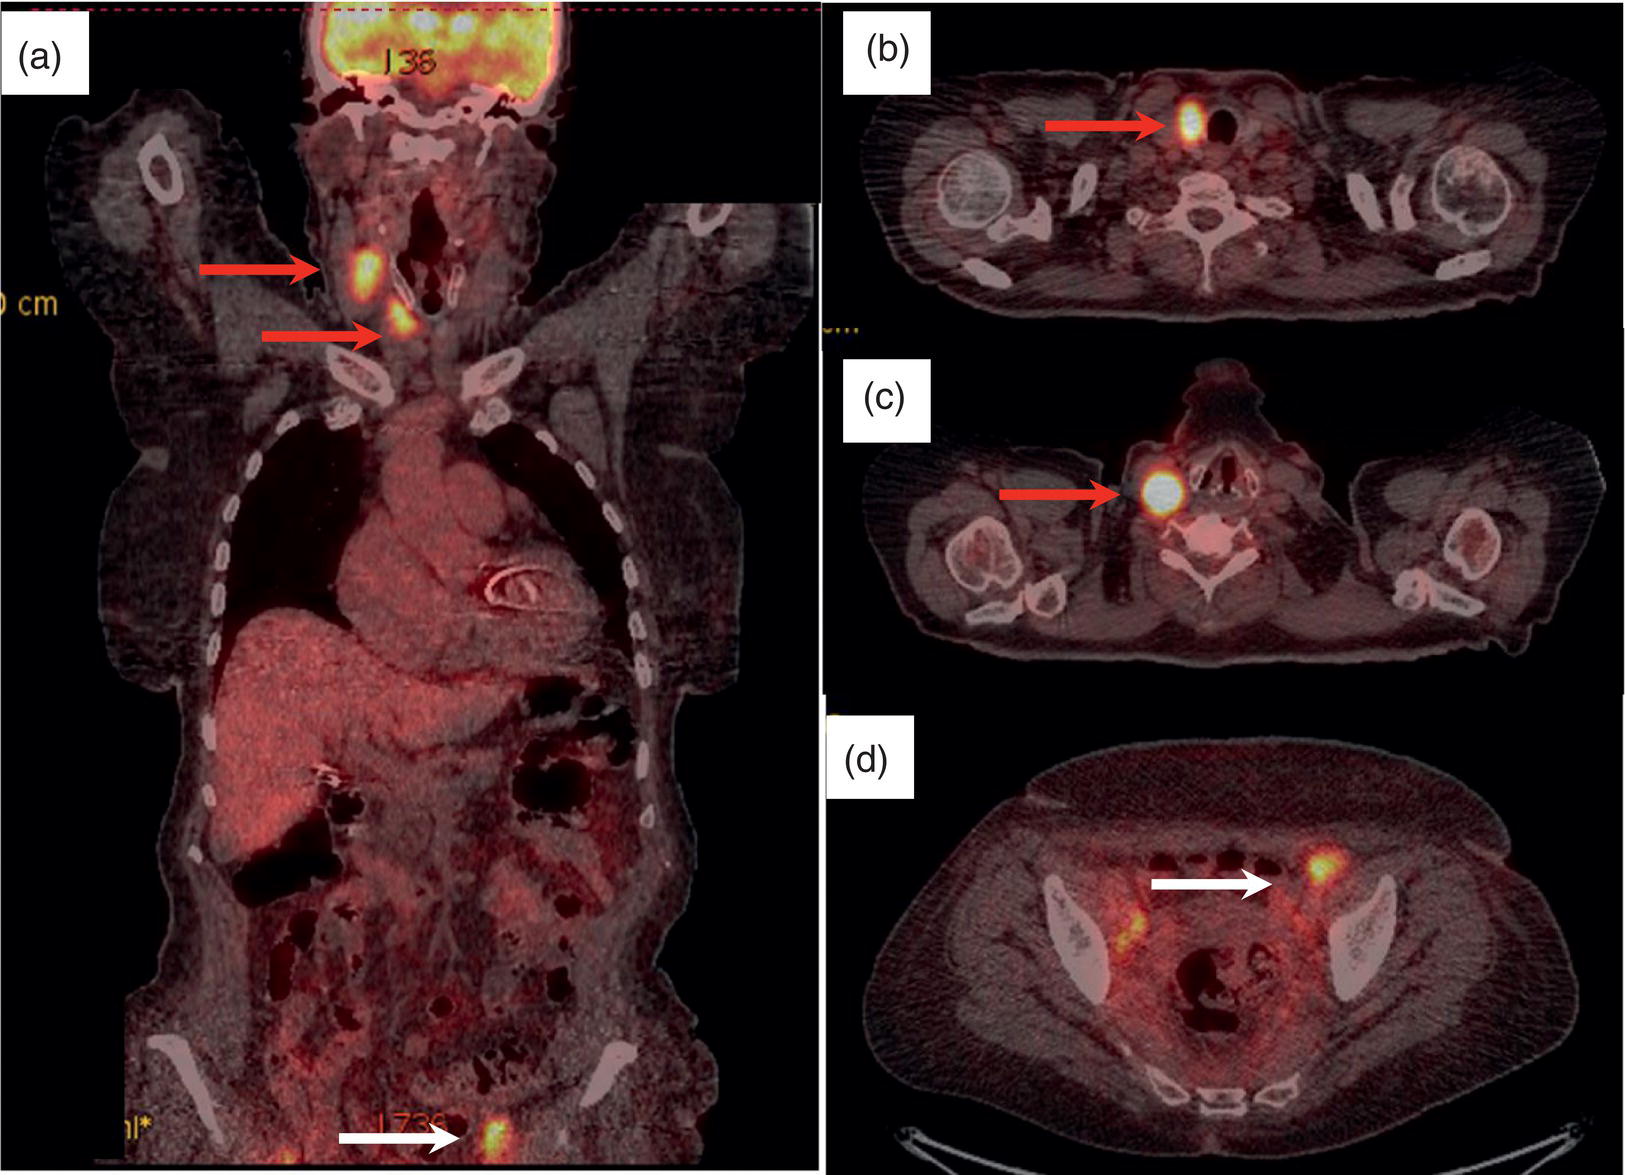 Schematic illustration of 18F-FDG PET/CT coronal view (a) and pelvic axial view (d) of a patient with cervix carcinoma during follow-up showing multiple metastatic lymph nodes in the pelvic region (white arrows) and pathologic increased uptake (SUVmax 18.1) in the right thyroid lobe (red arrow, axial view b) with right latero-cervical lymphadenopathy (red arrow, axial cervical view c). The histology after thyroidectomy revealed synchronous papillary thyroid carcinoma with lymph node metastases.